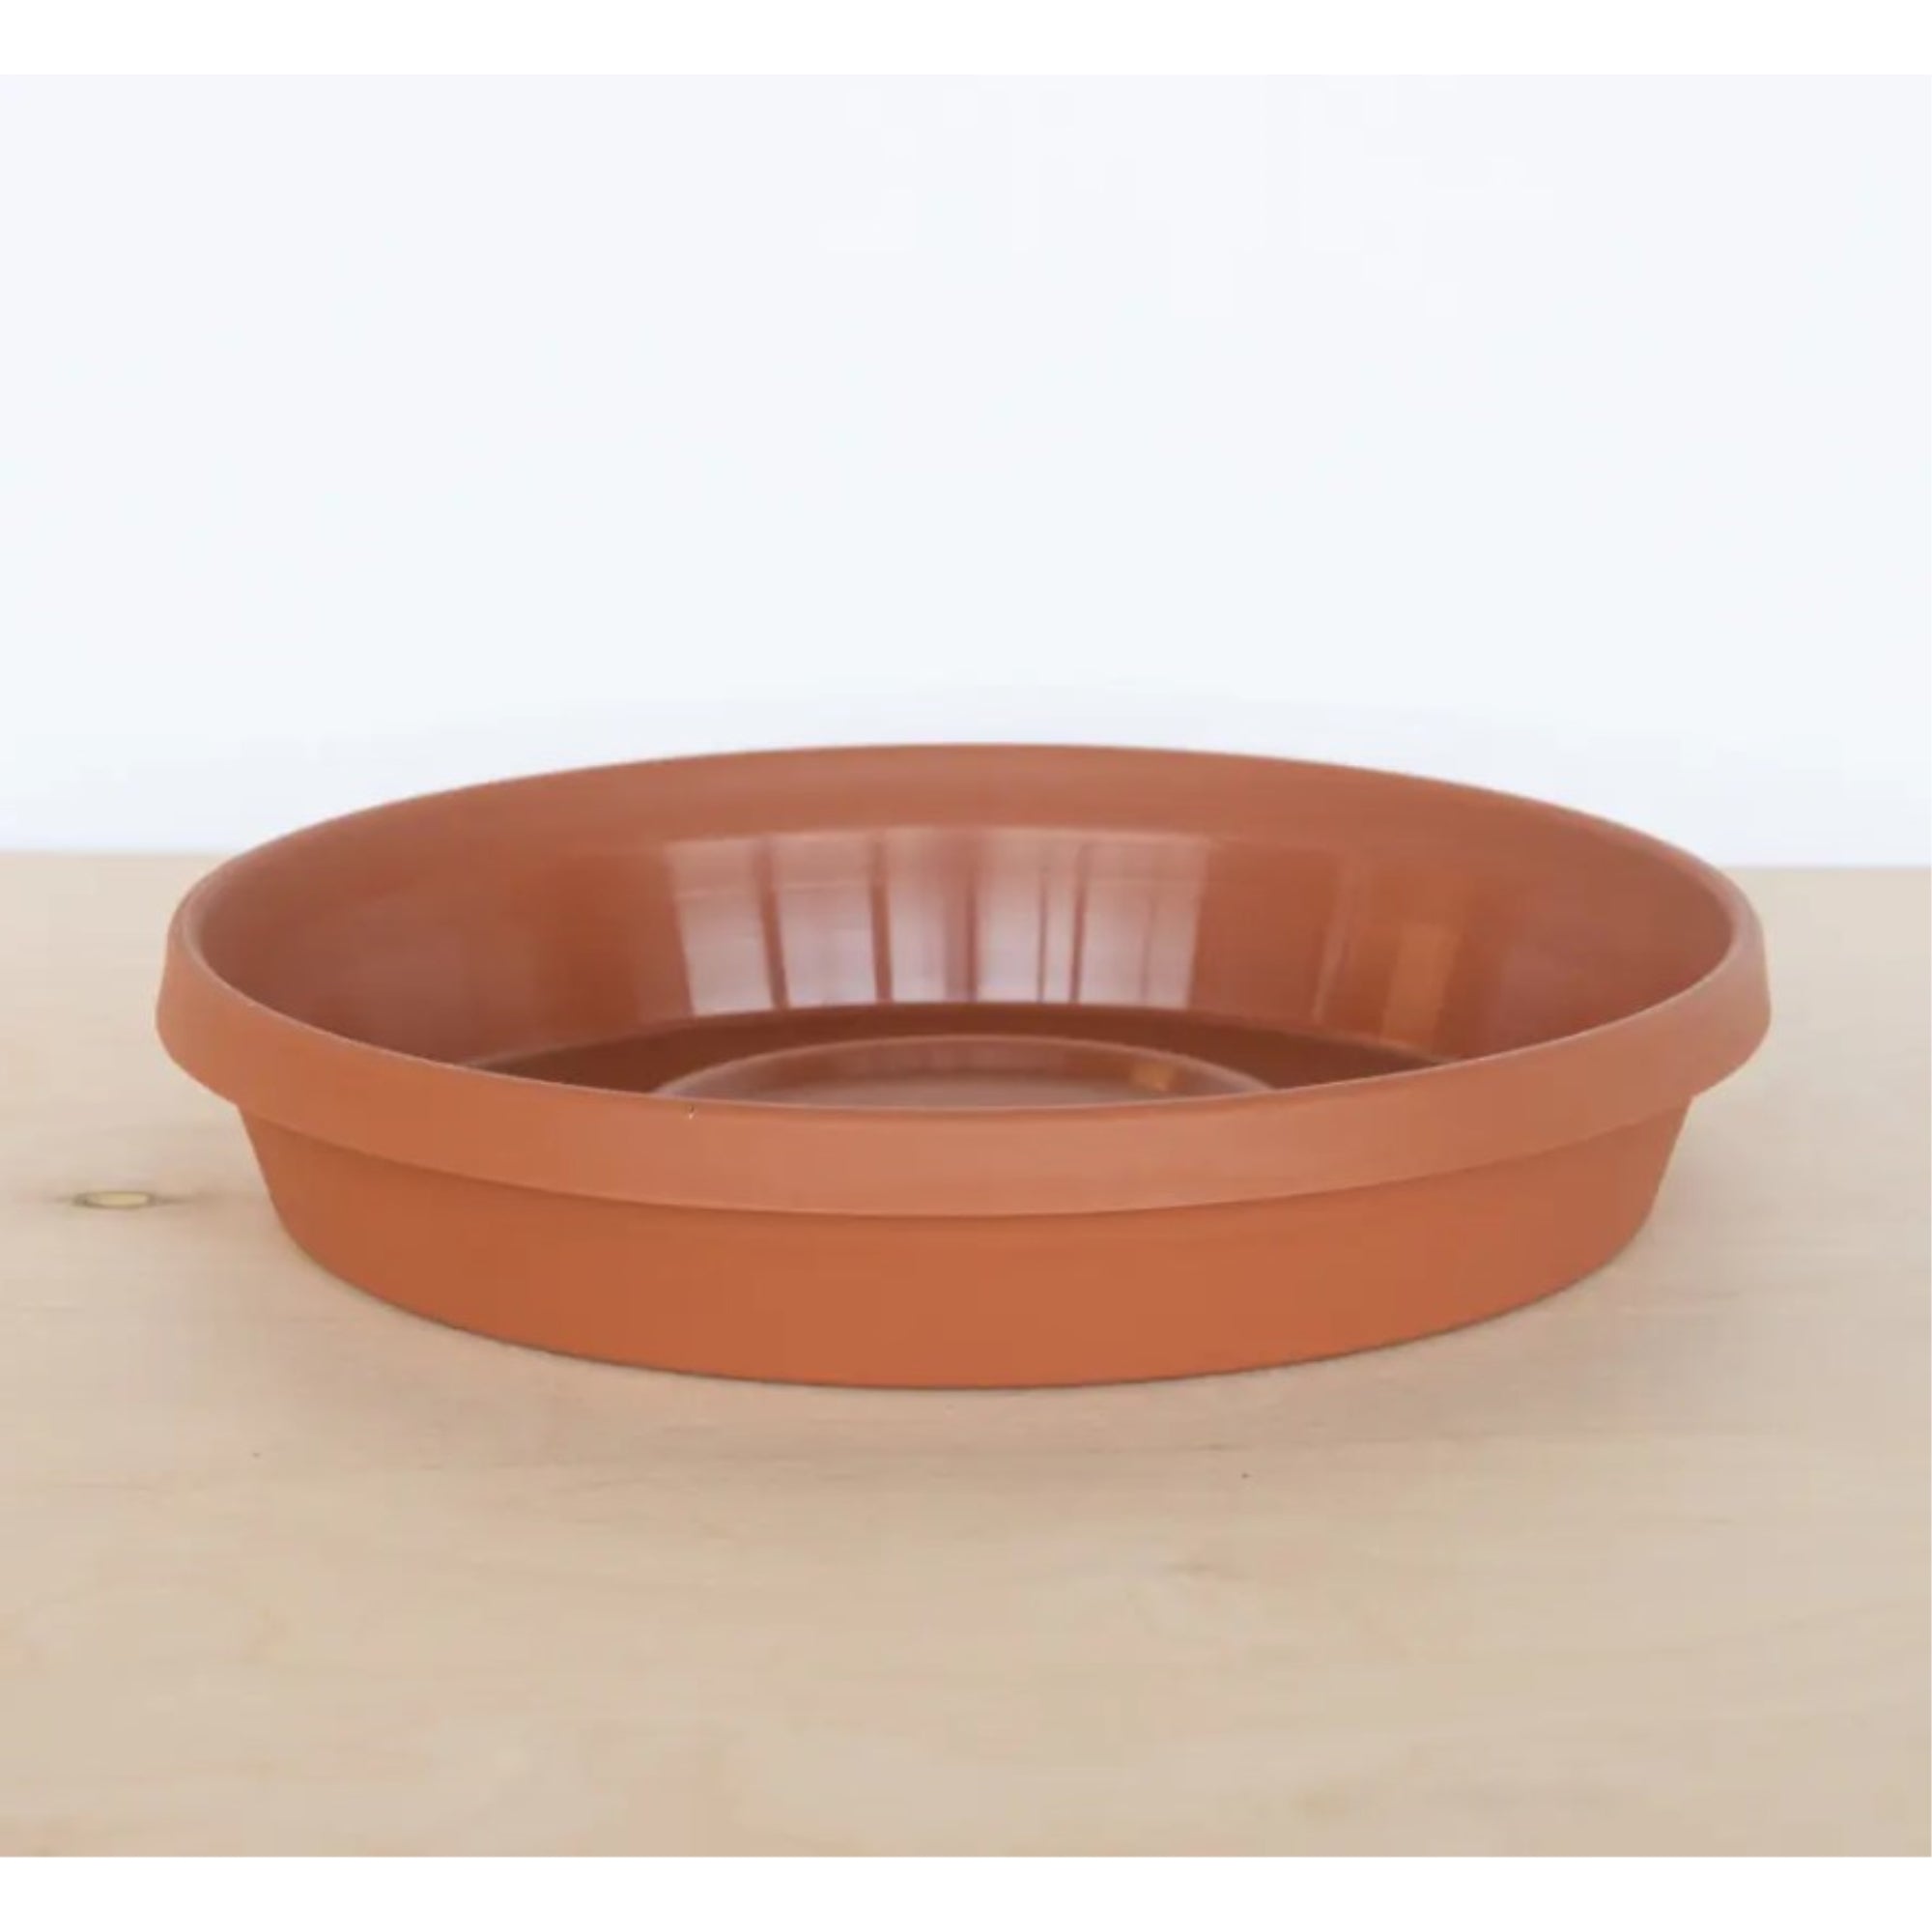 Bloem Terra Indoor/Outdoor Round Plastic Saucer Tray for Planters and Pots